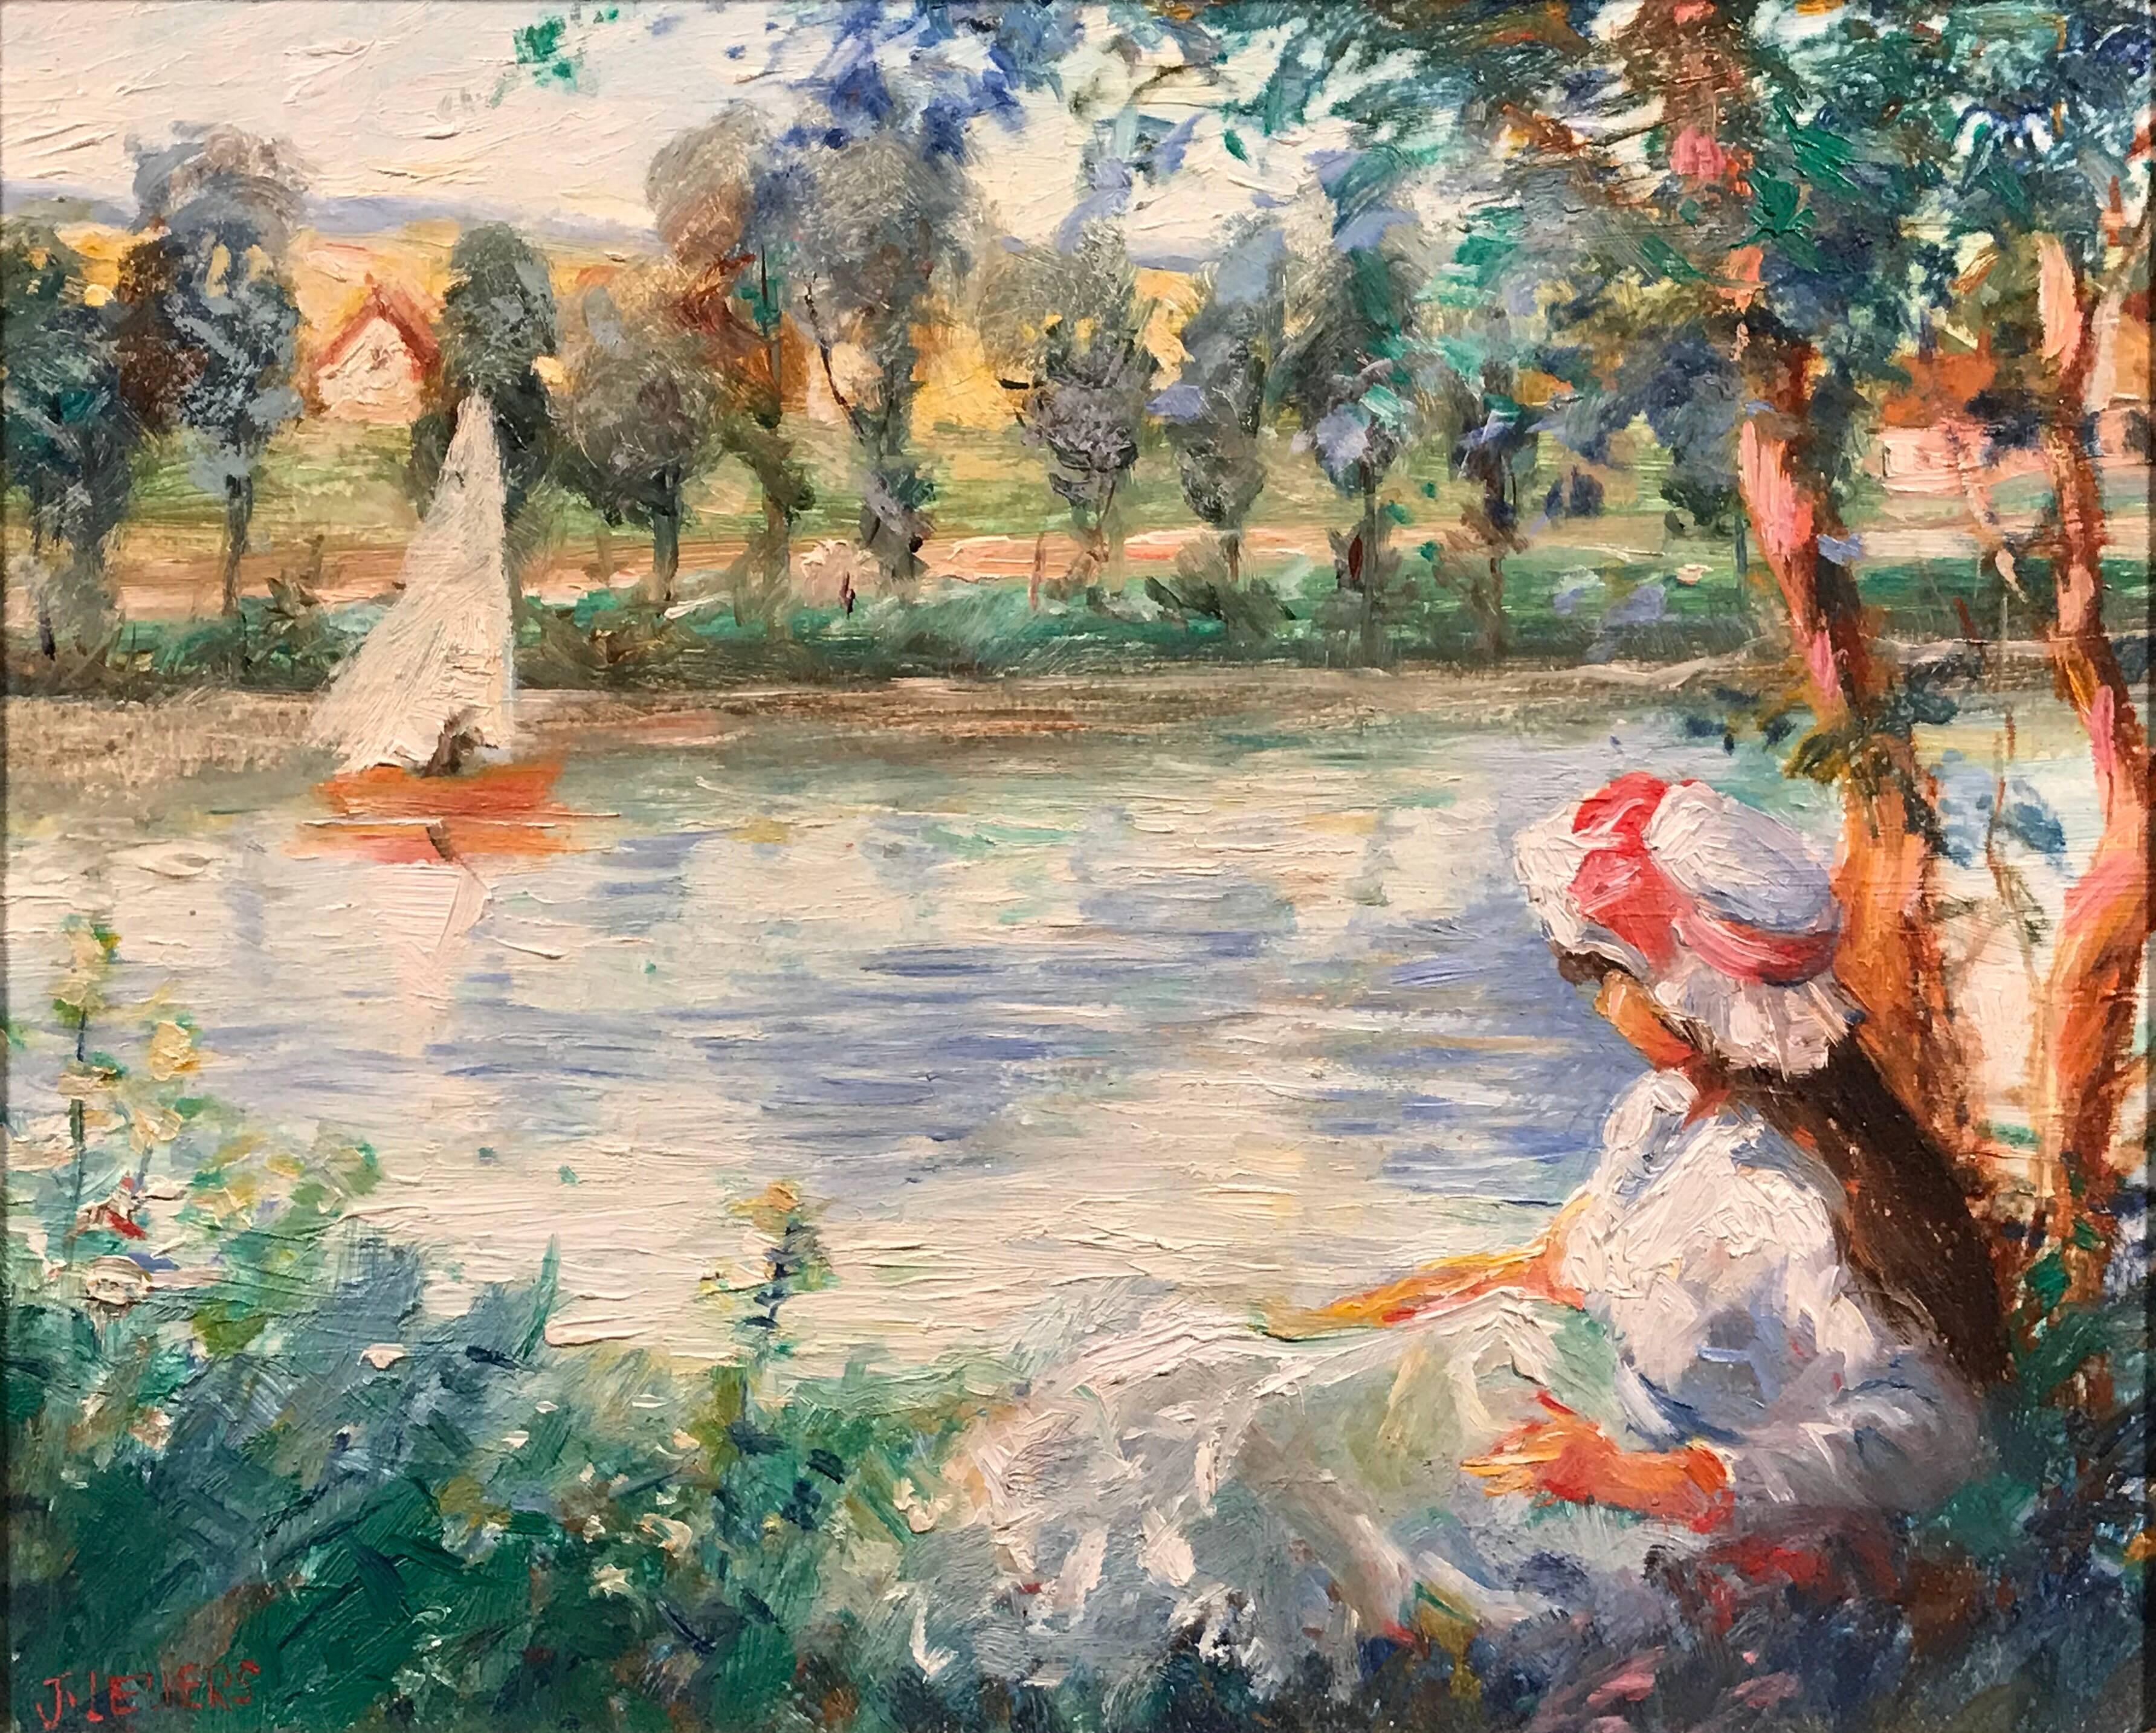 Jeanette Leuers Landscape Painting - French Impressionist Oil Girl by a River Signed Oil